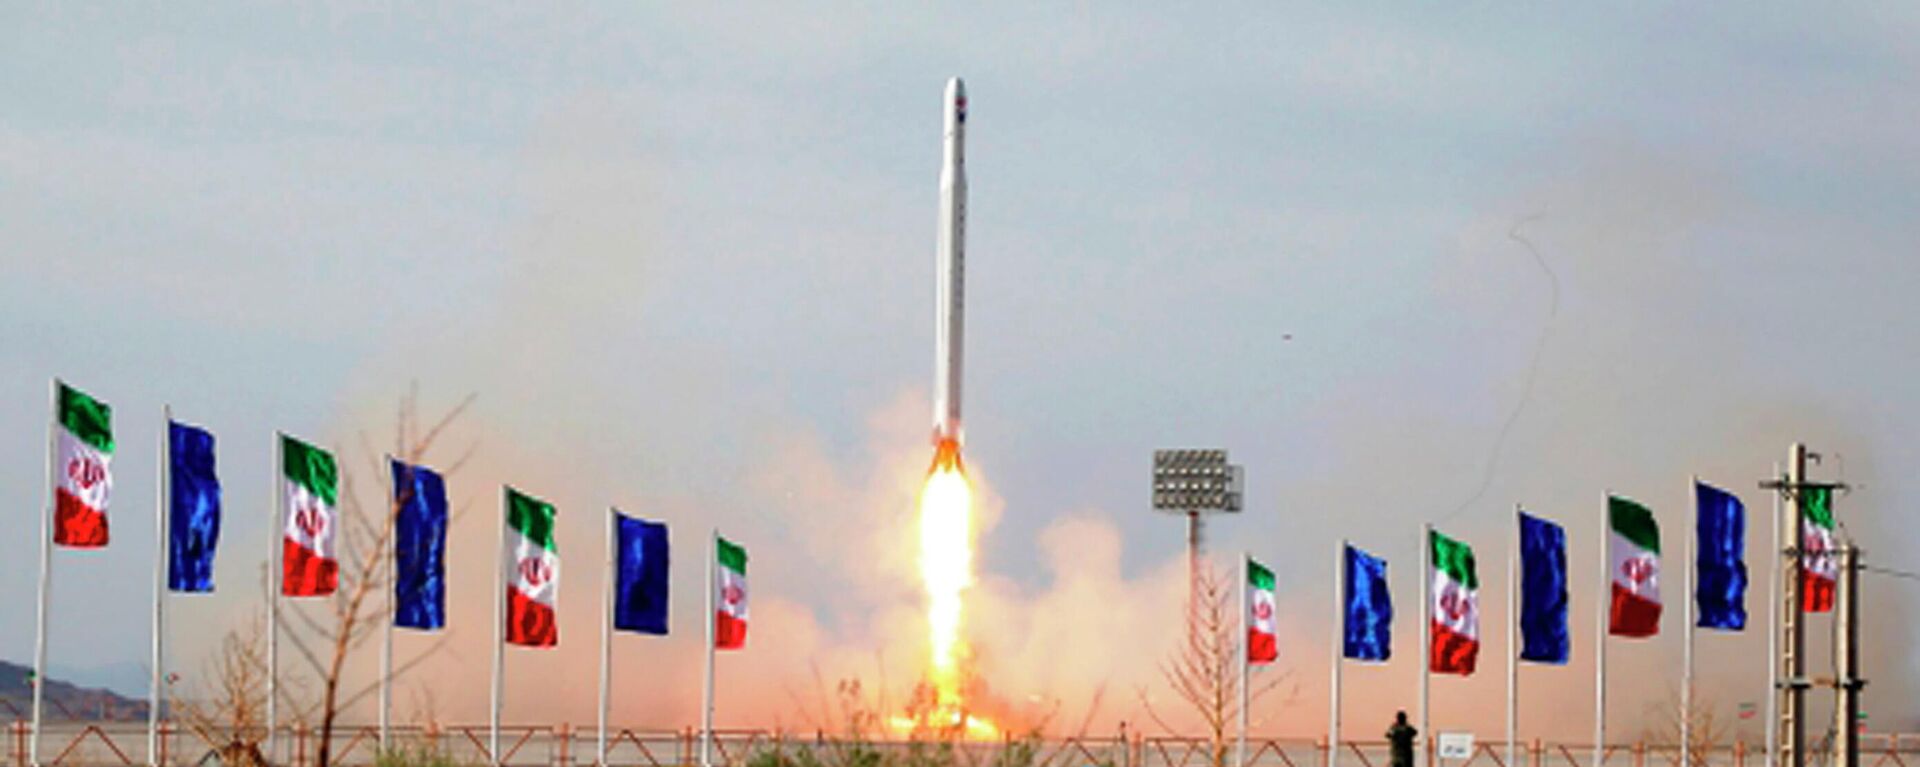 An Iranian rocket carrying a satellite is launched from an undisclosed site believed to be in Iran's Semnan province on April 22, 2020 - Sputnik International, 1920, 10.10.2023